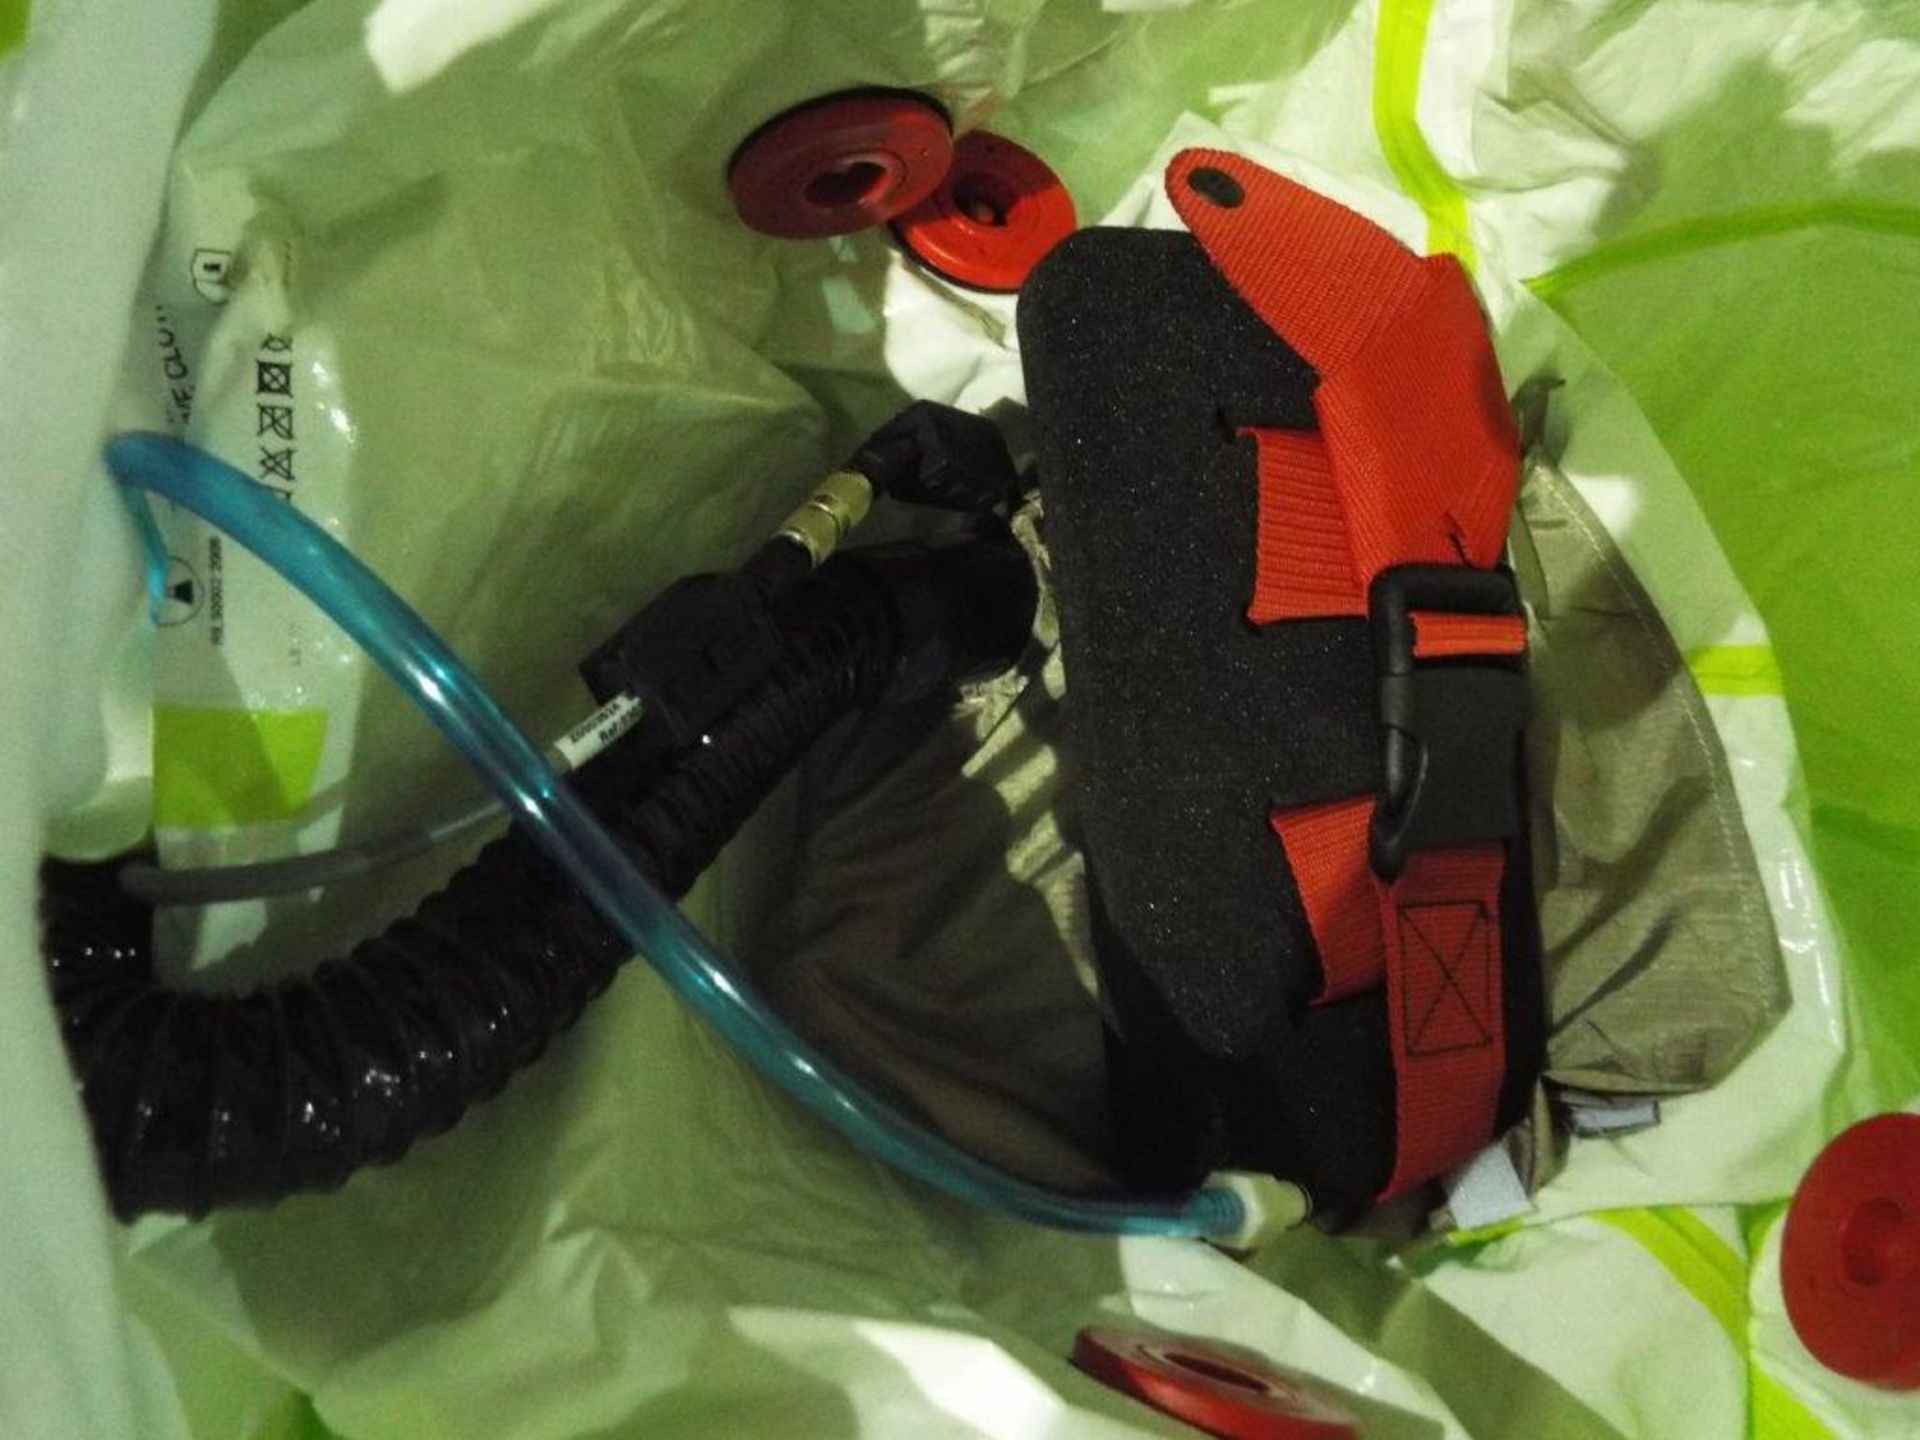 Respirex Powered Decontamination Suit with Attached Boots and Gloves, Helmet, Filters, Battery etc - Image 12 of 17